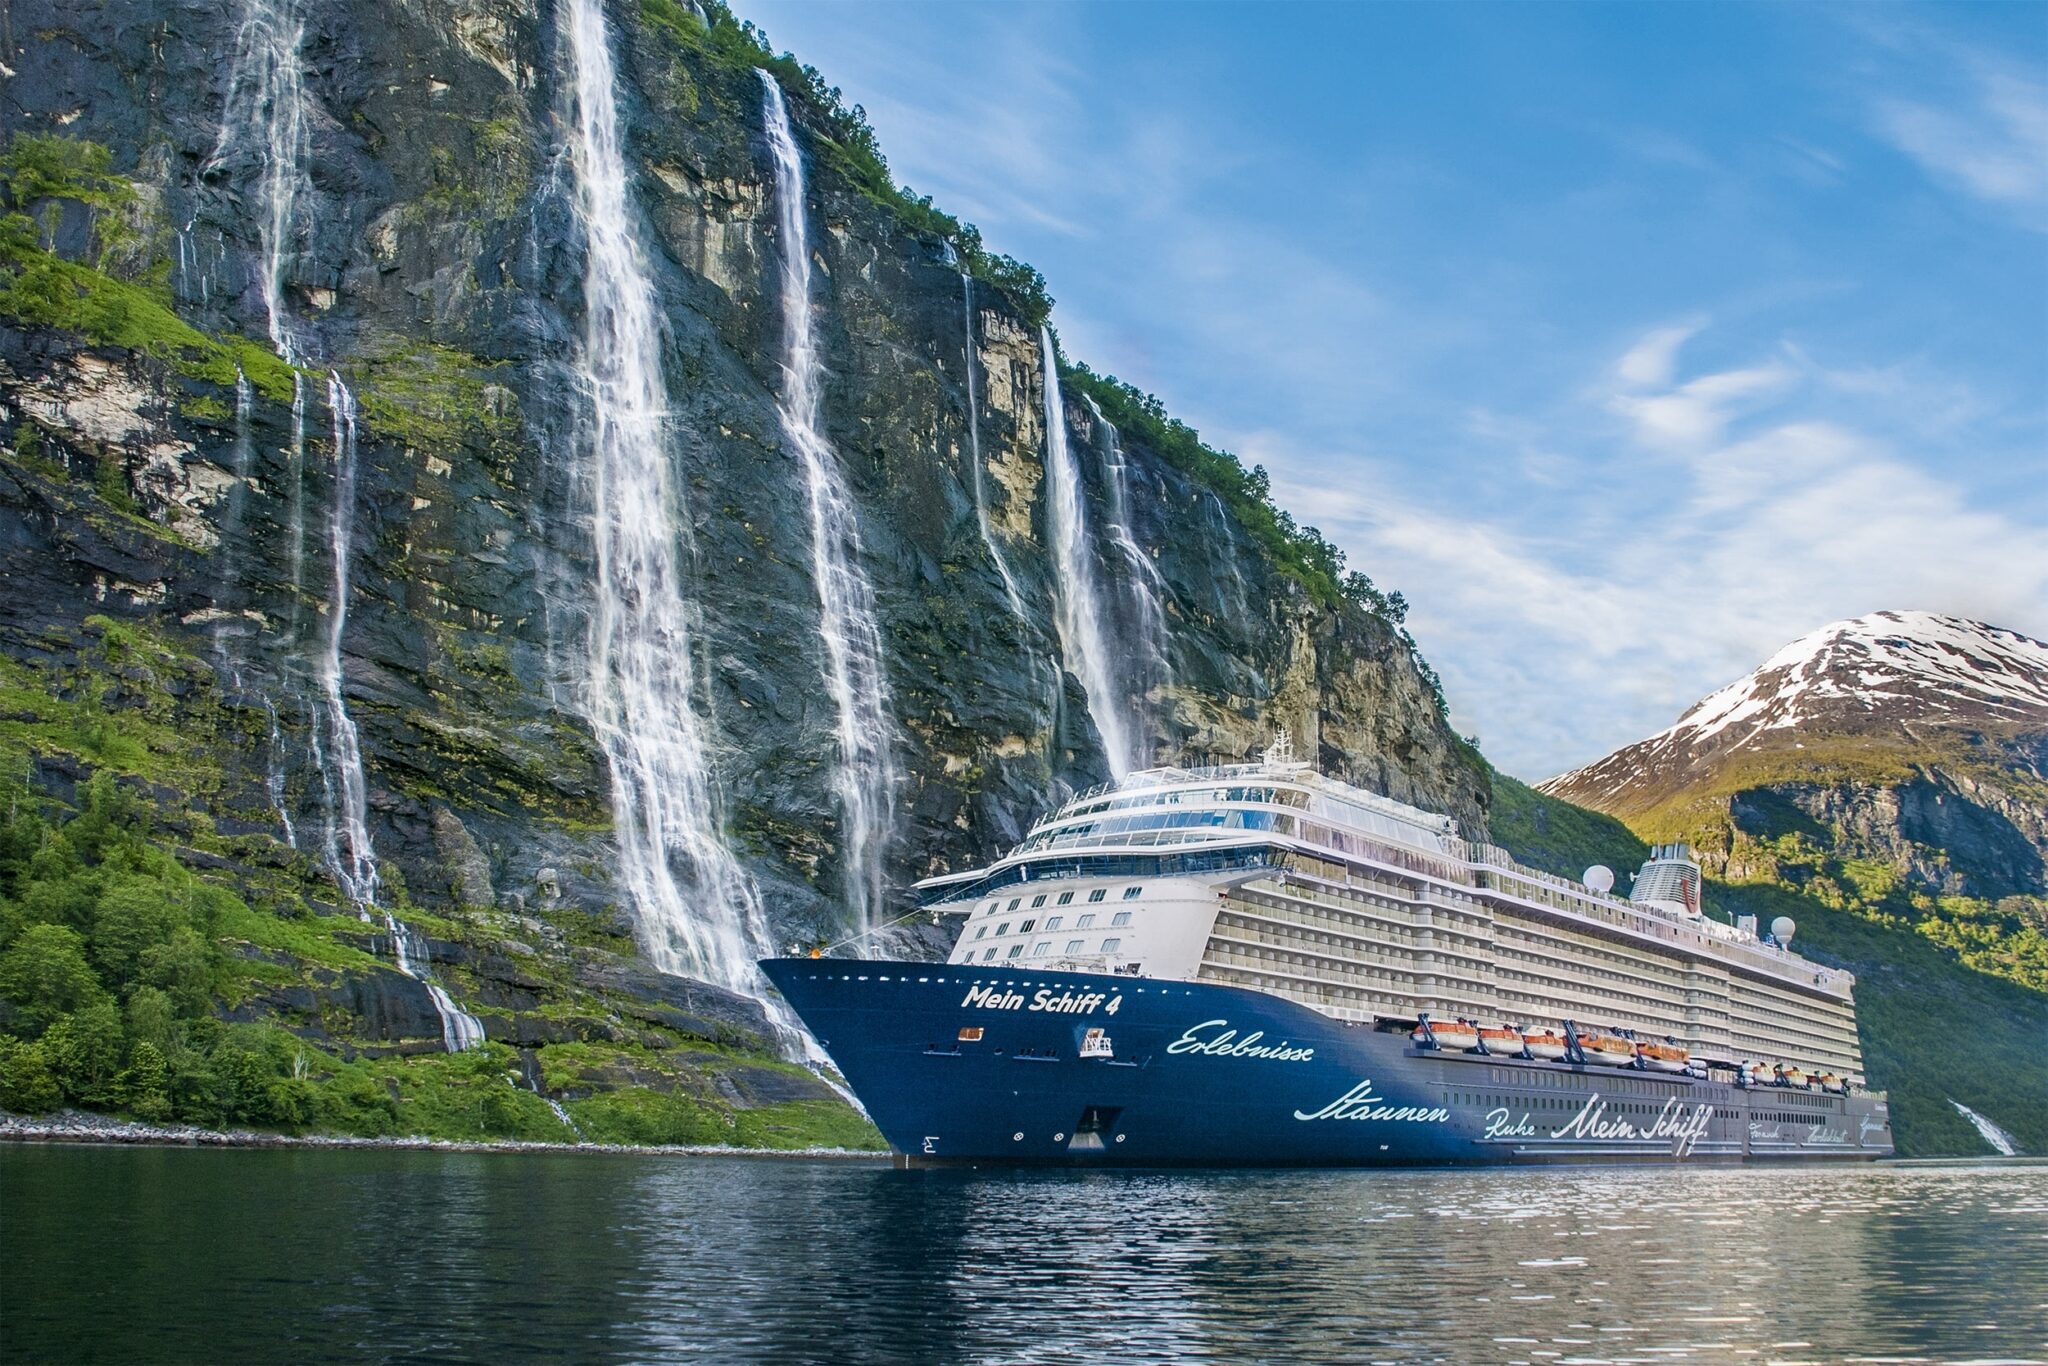 A view of a ship from the Mein Schiff TUI Cruise fleet, which offers excursions through Norway’s coasts and port cities in the north. (Photo by Mathias Kokartis of Cruise Vision. Source TUI Group.